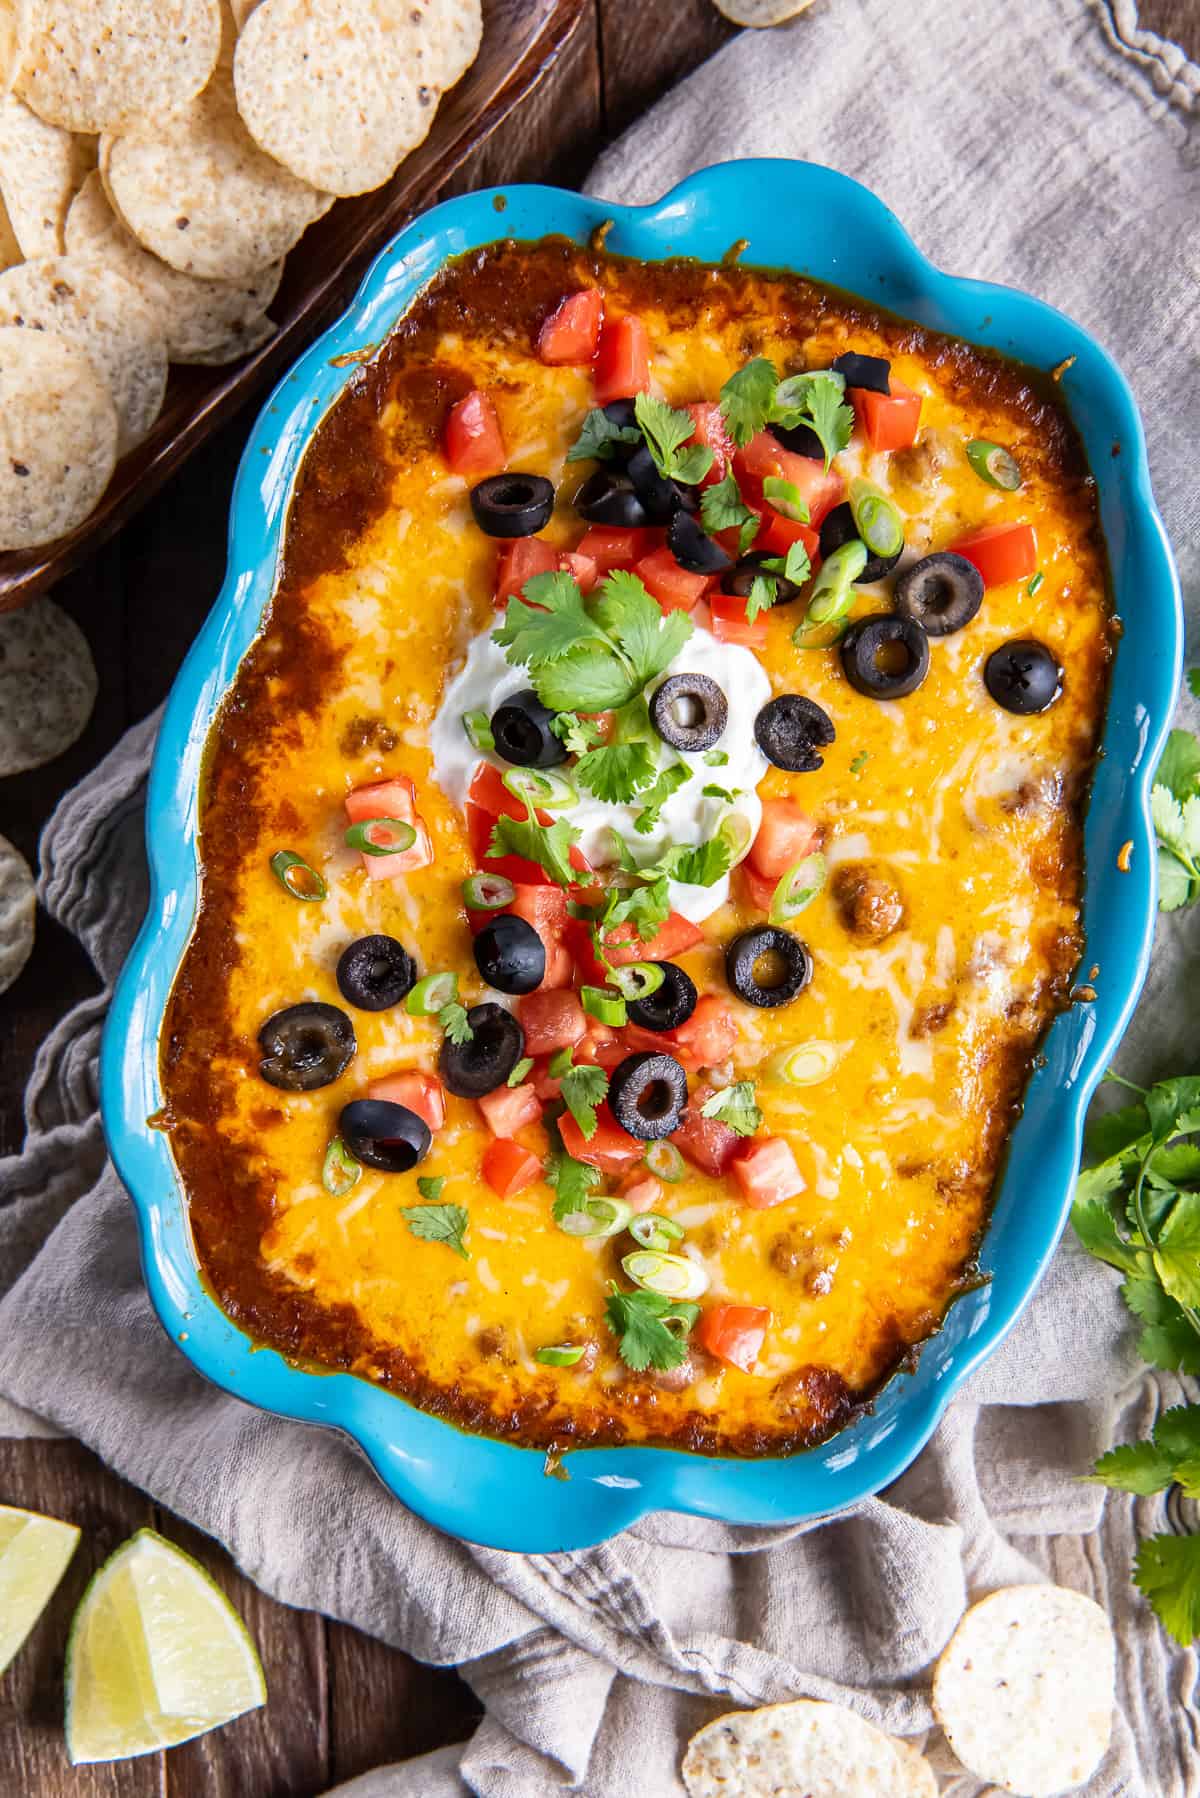 Beef enchilada dip in a blue baking dish topped with melted cheese, olives, and sour cream surrounded by lime wedges and tortilla chips.